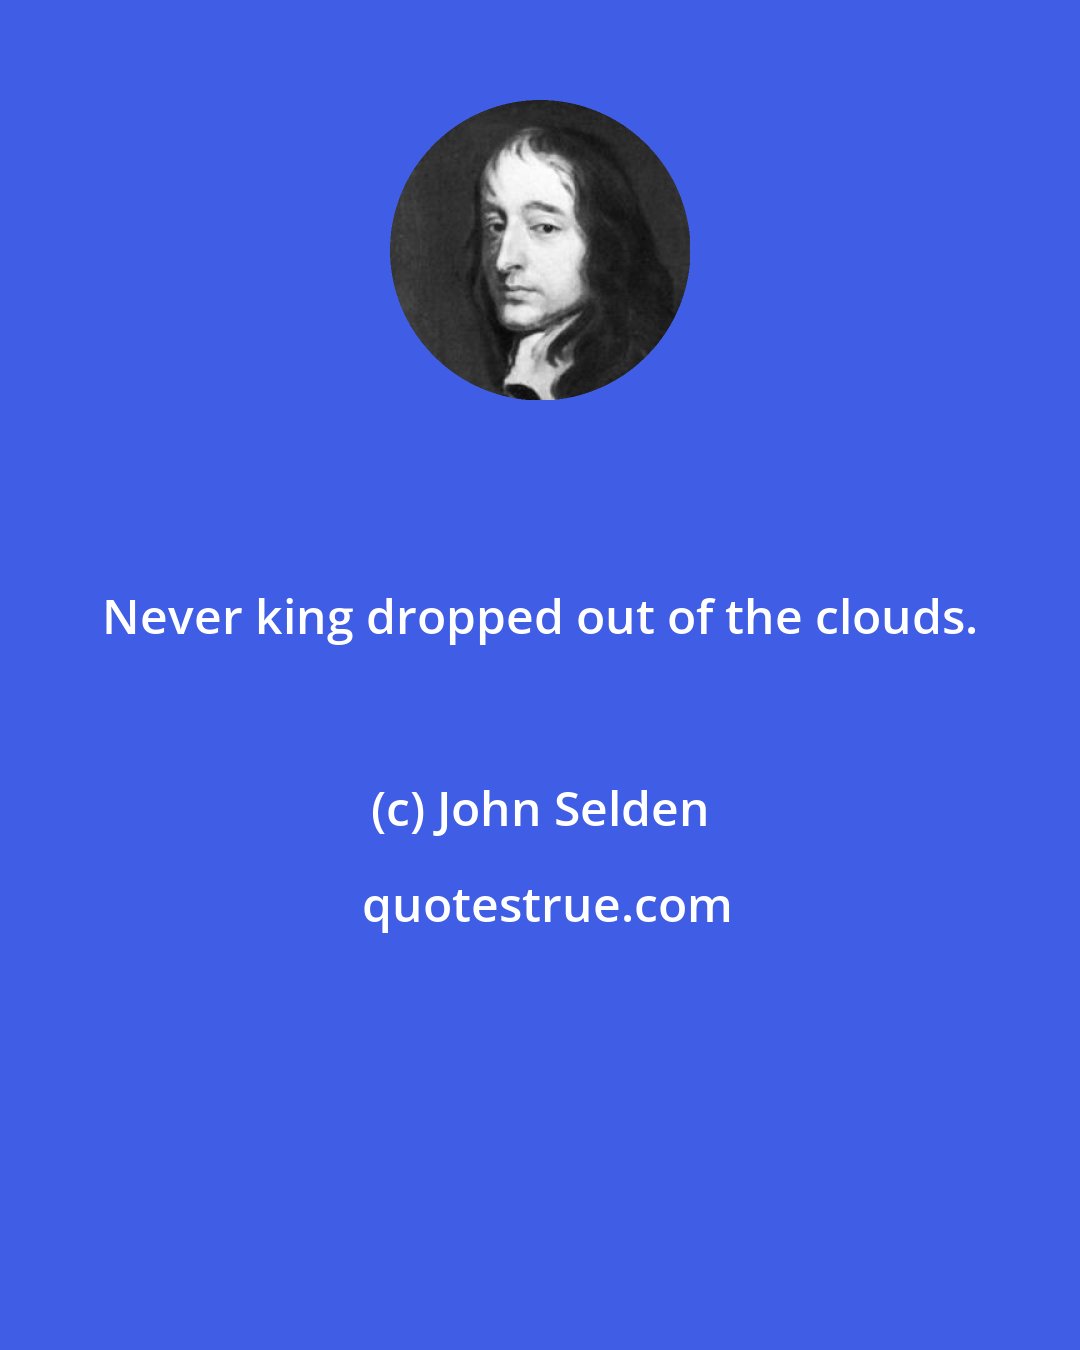 John Selden: Never king dropped out of the clouds.